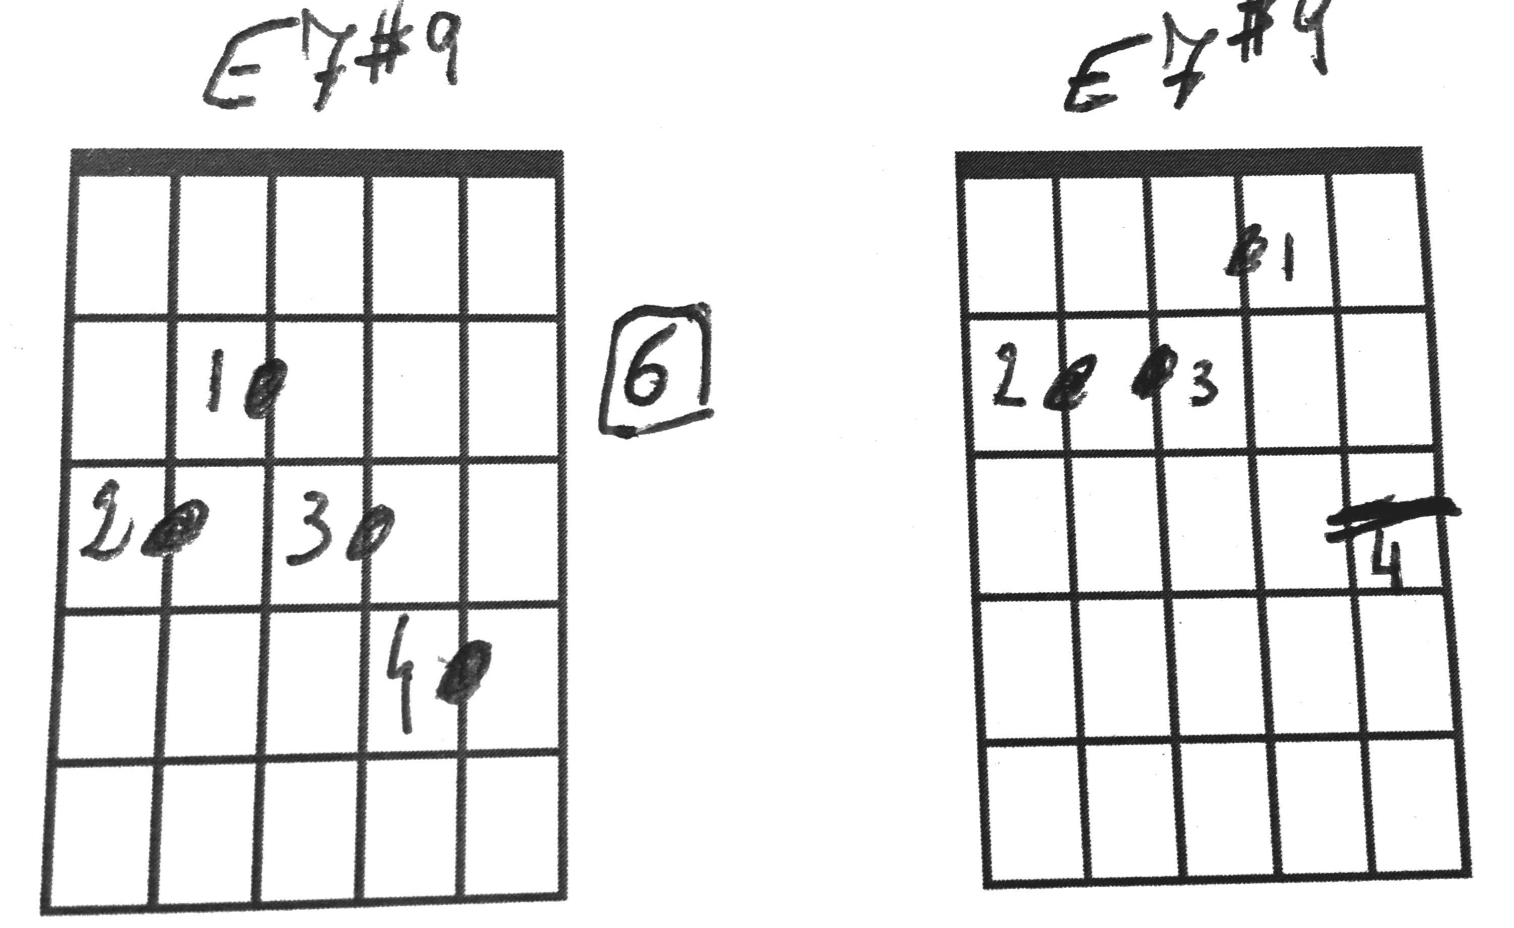 E7#9, more commonly known as "the Jimi Hendrix chord" 